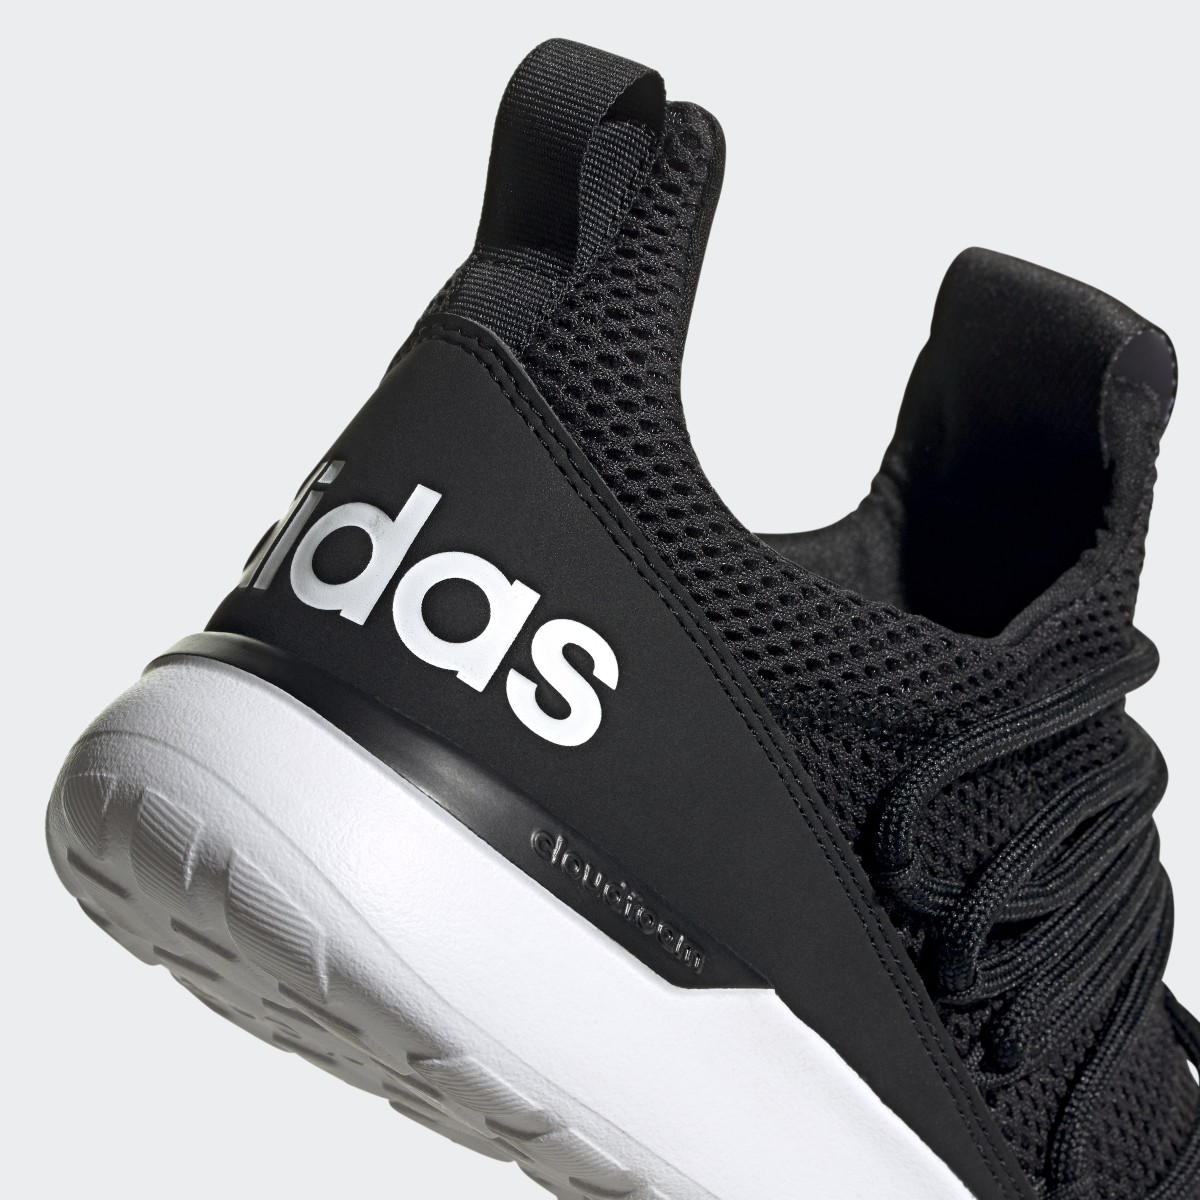 Adidas Lite Racer Adapt 3.0 Shoes. 9